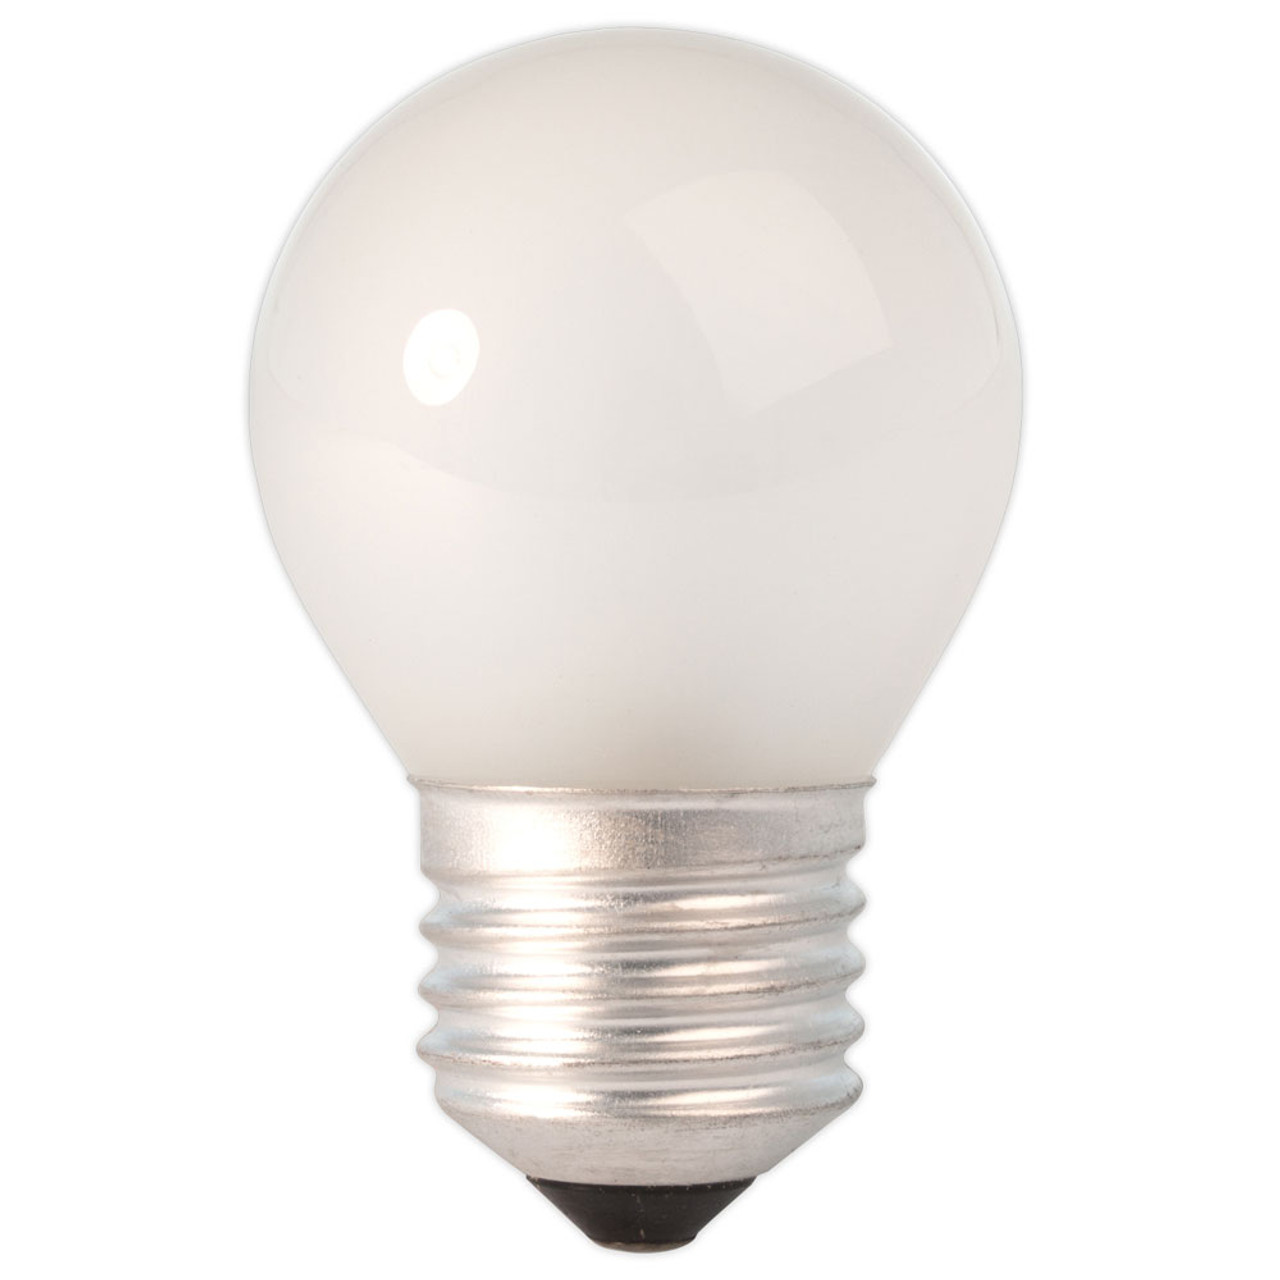 Calex Ball lamp 240V 10W 55lm E27 Frosted